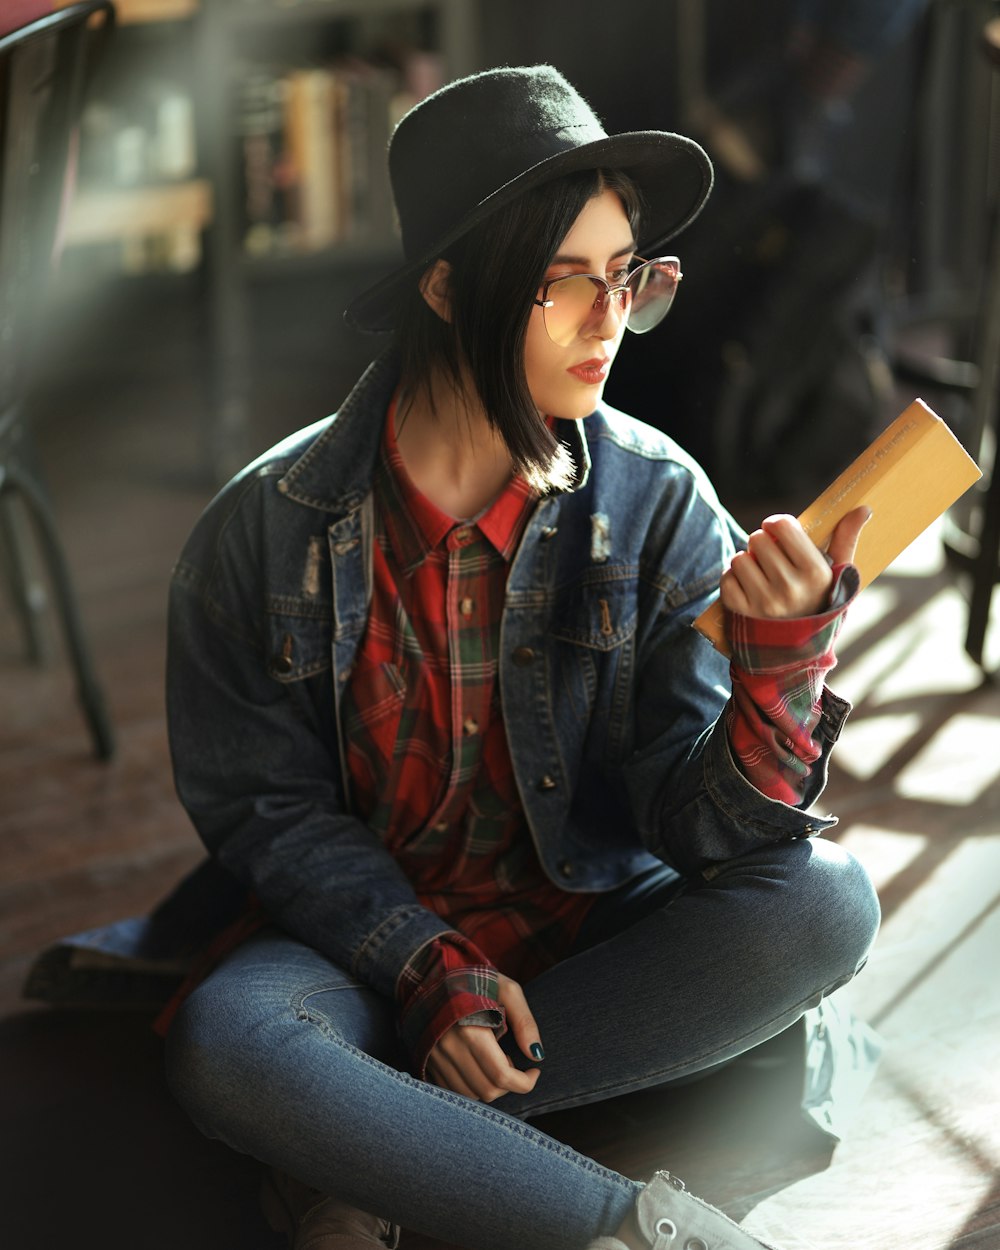 woman in blue denim jacket and blue denim jeans sitting on brown wooden bench during daytime